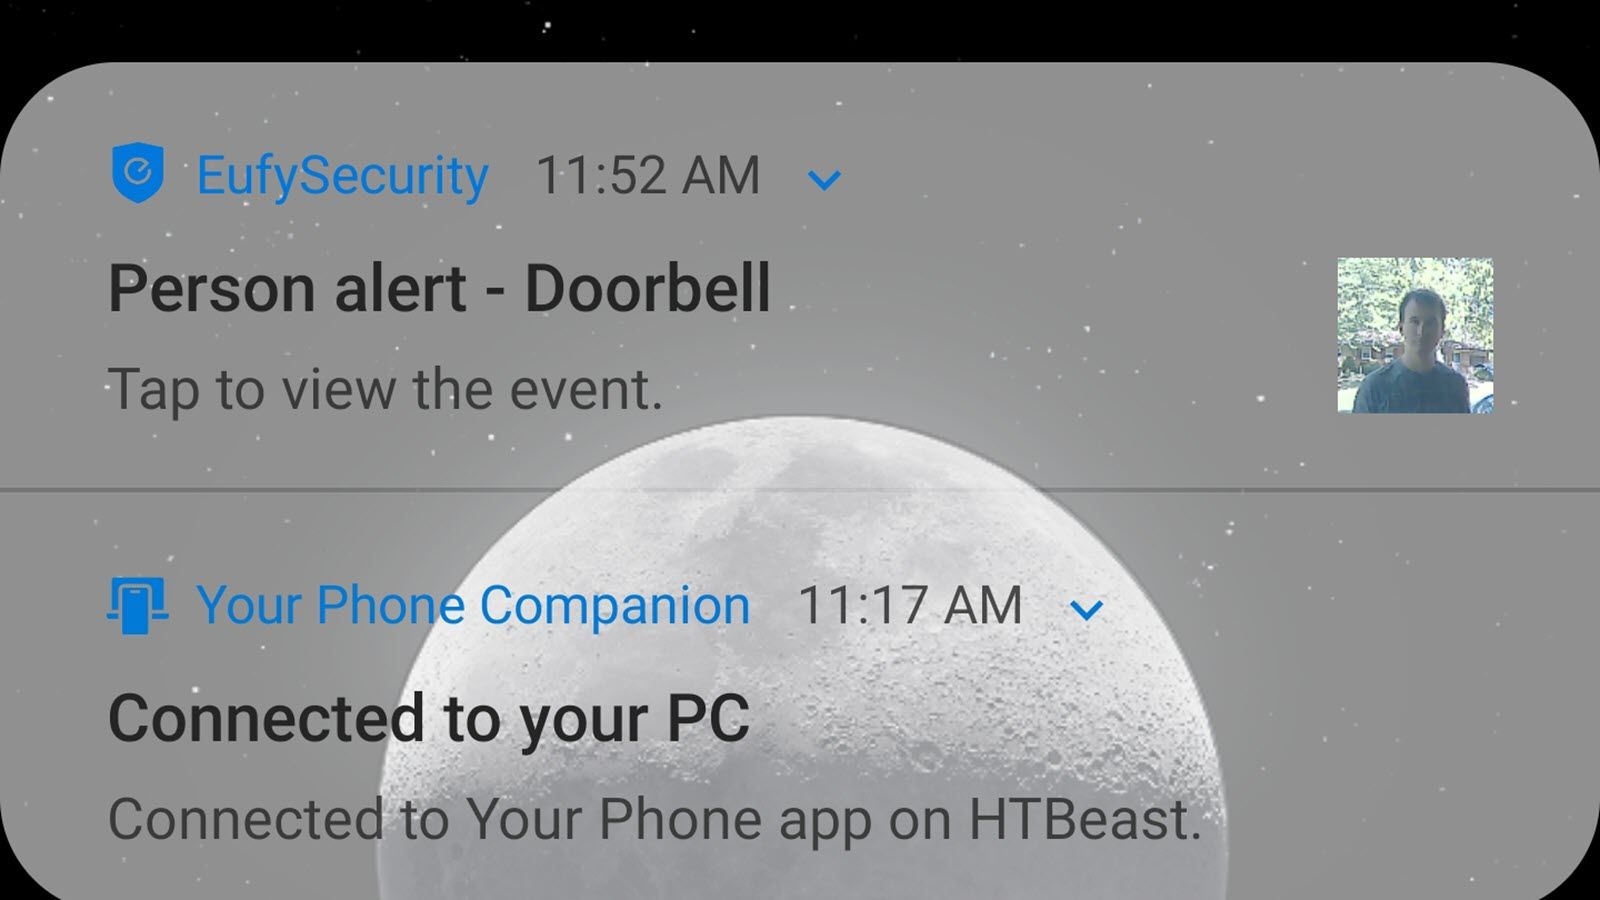 An Eufy Doorbell Android notification Person alert showing an image of a person at the door.